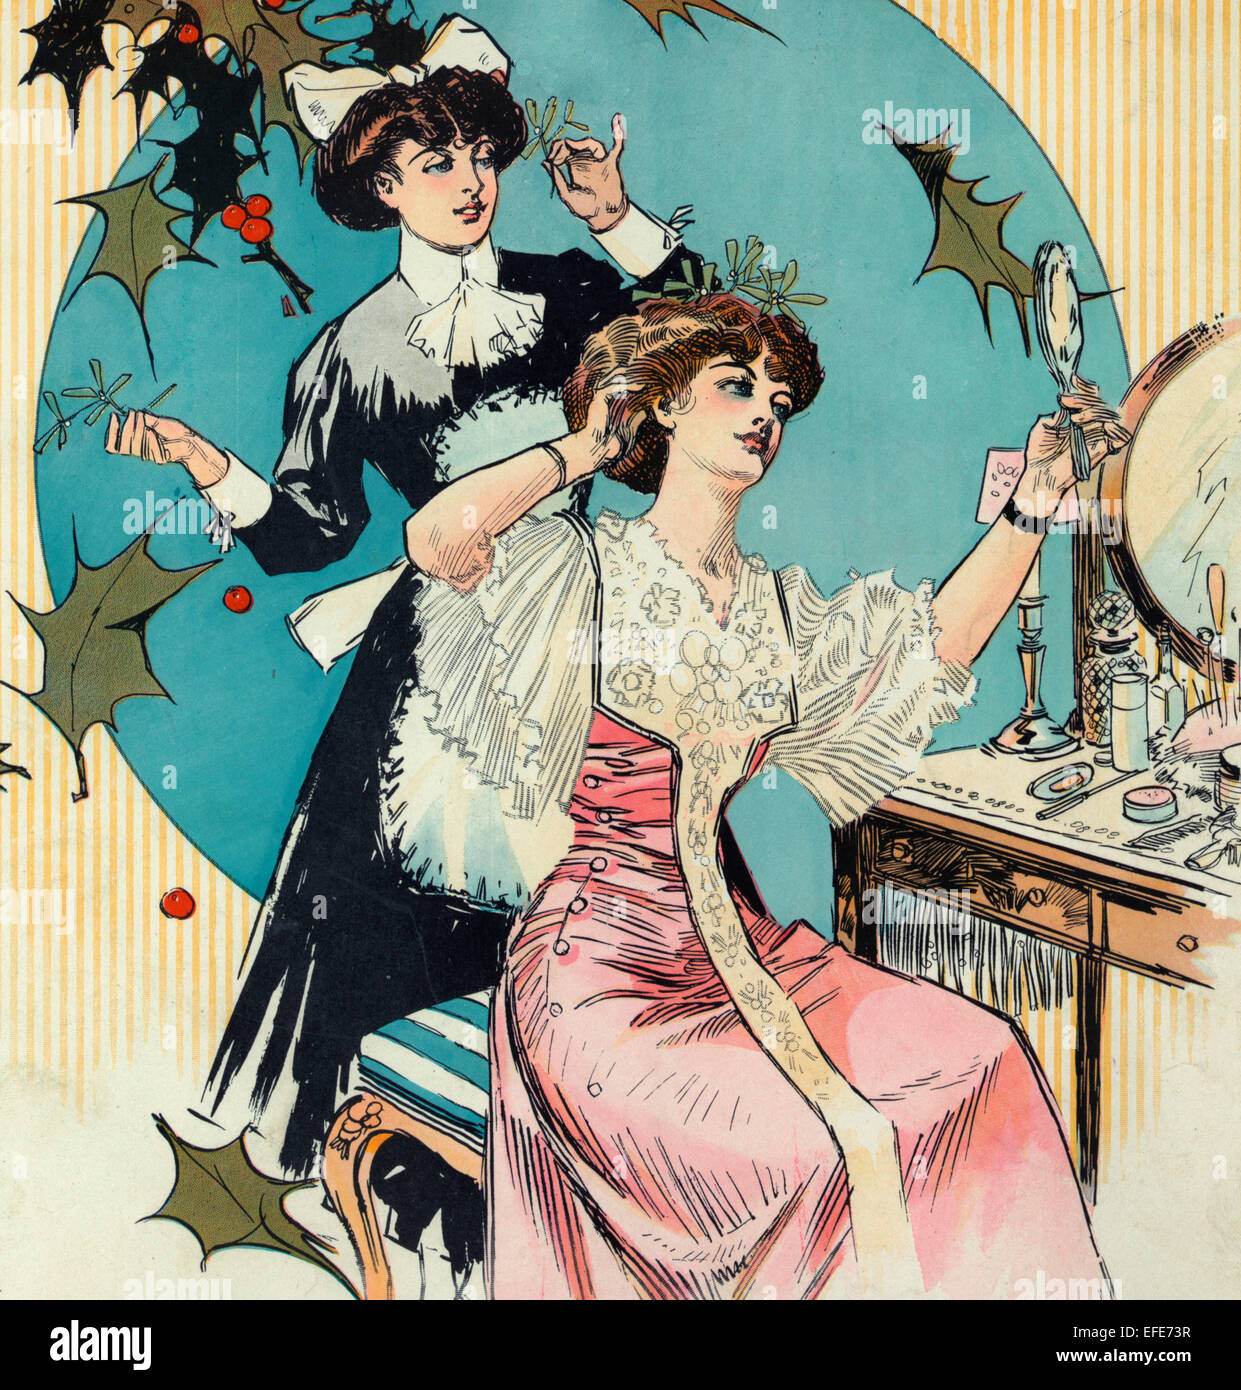 Christmas 1908 - Illustration shows a young woman sitting at her dressing table, holding up a mirror to admire her hair, as a maid arranges plant sprigs in her hair. Stock Photo